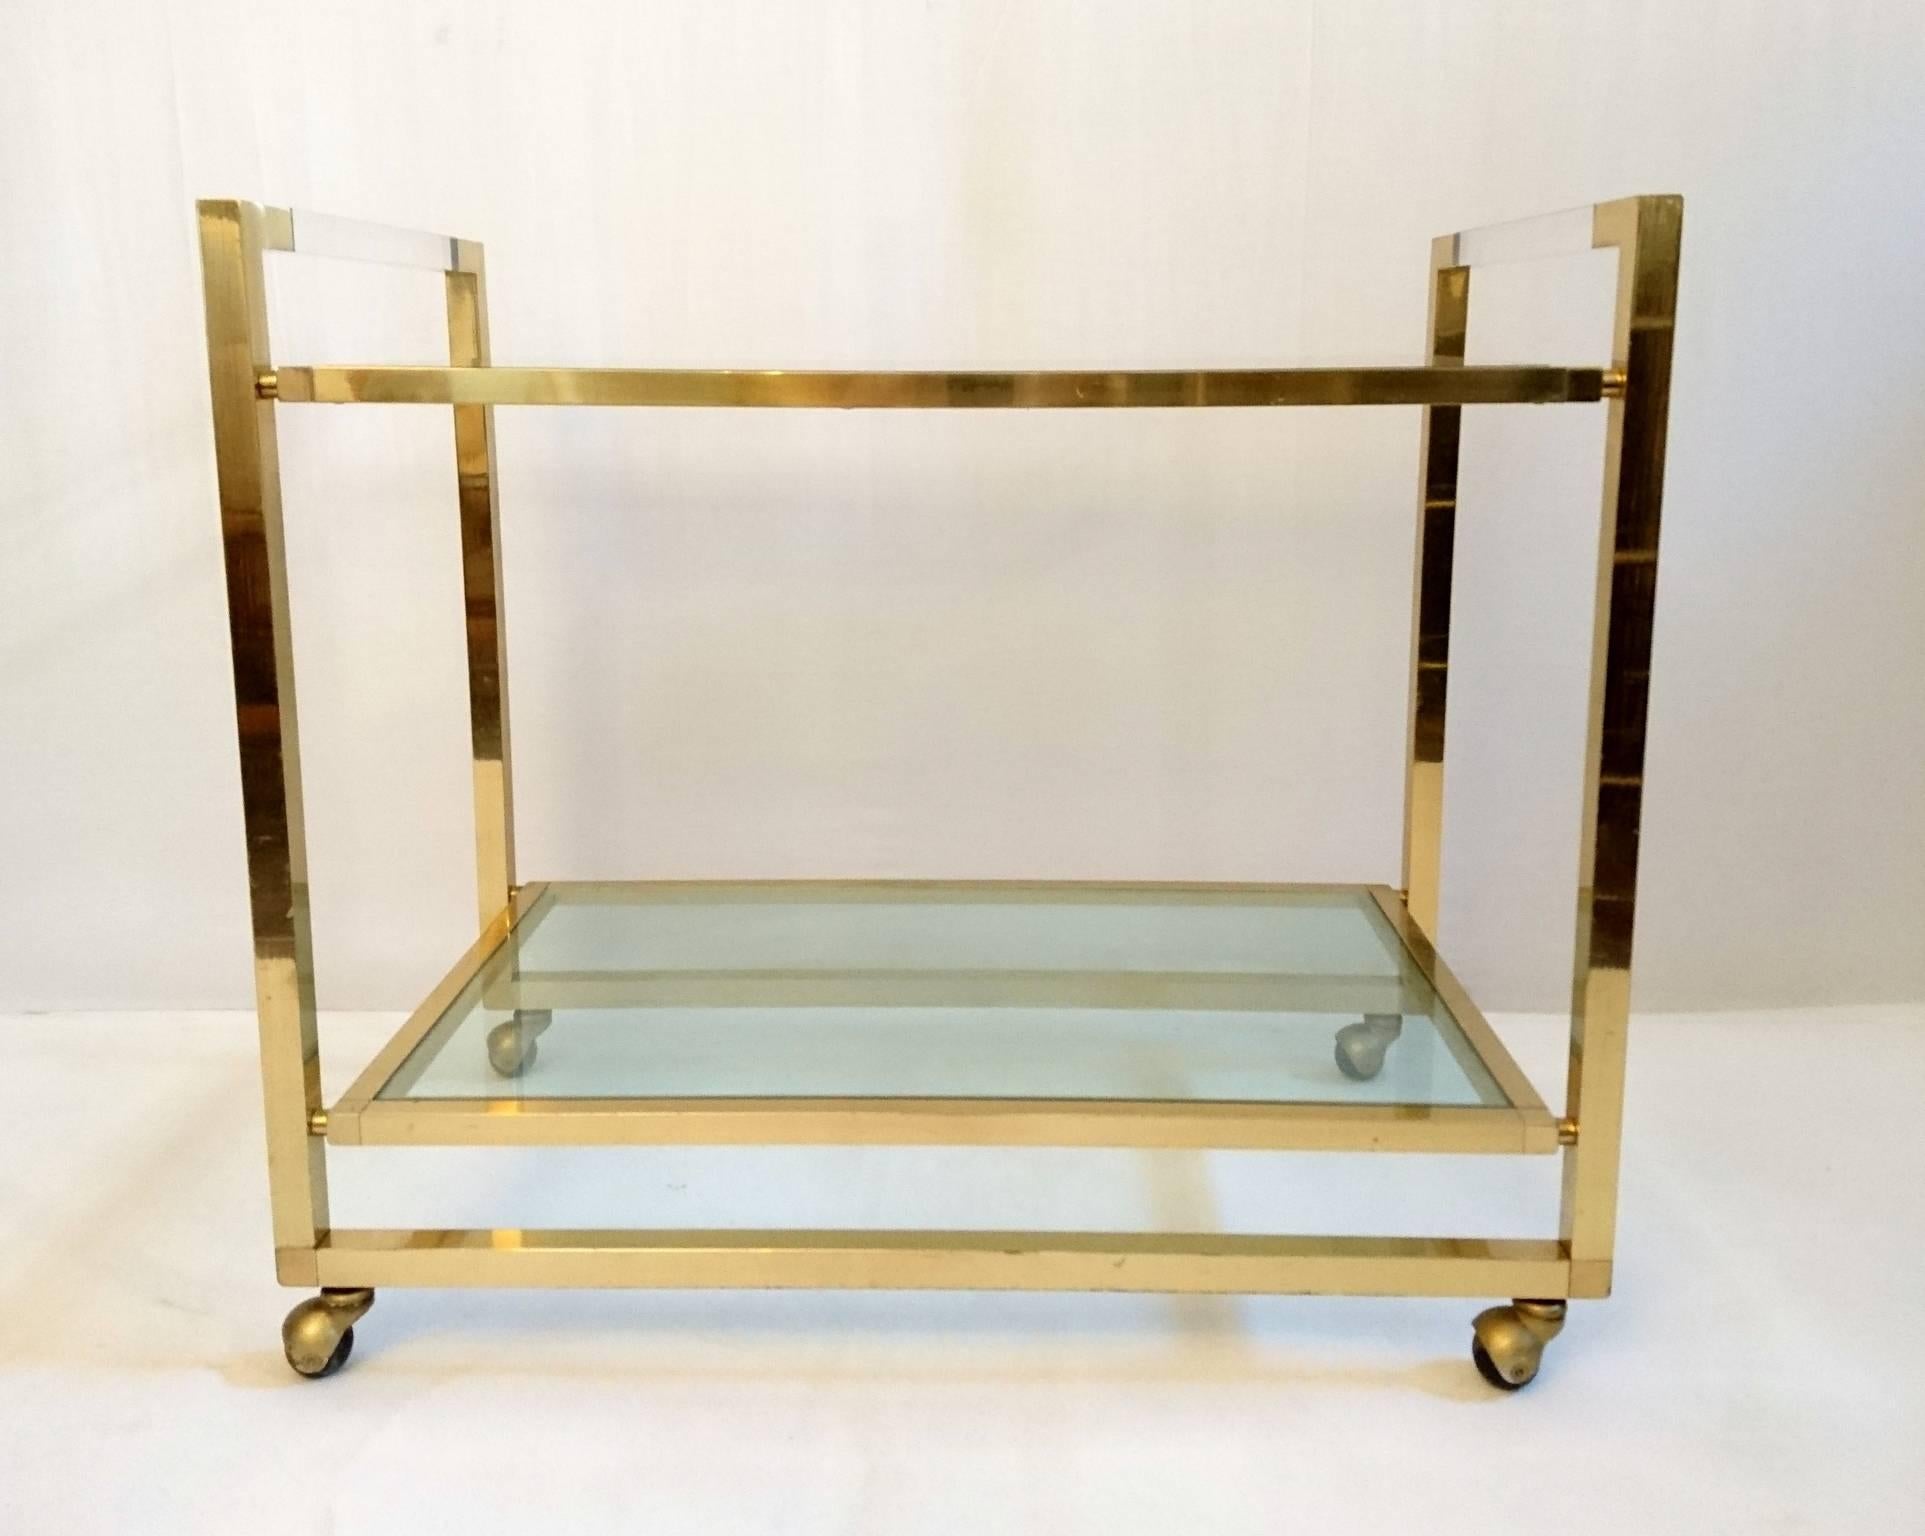 Two-tier bar cart in brass with Lucite handlebars and glass shelves. High quality and solid construction. Original well functioning wheels.